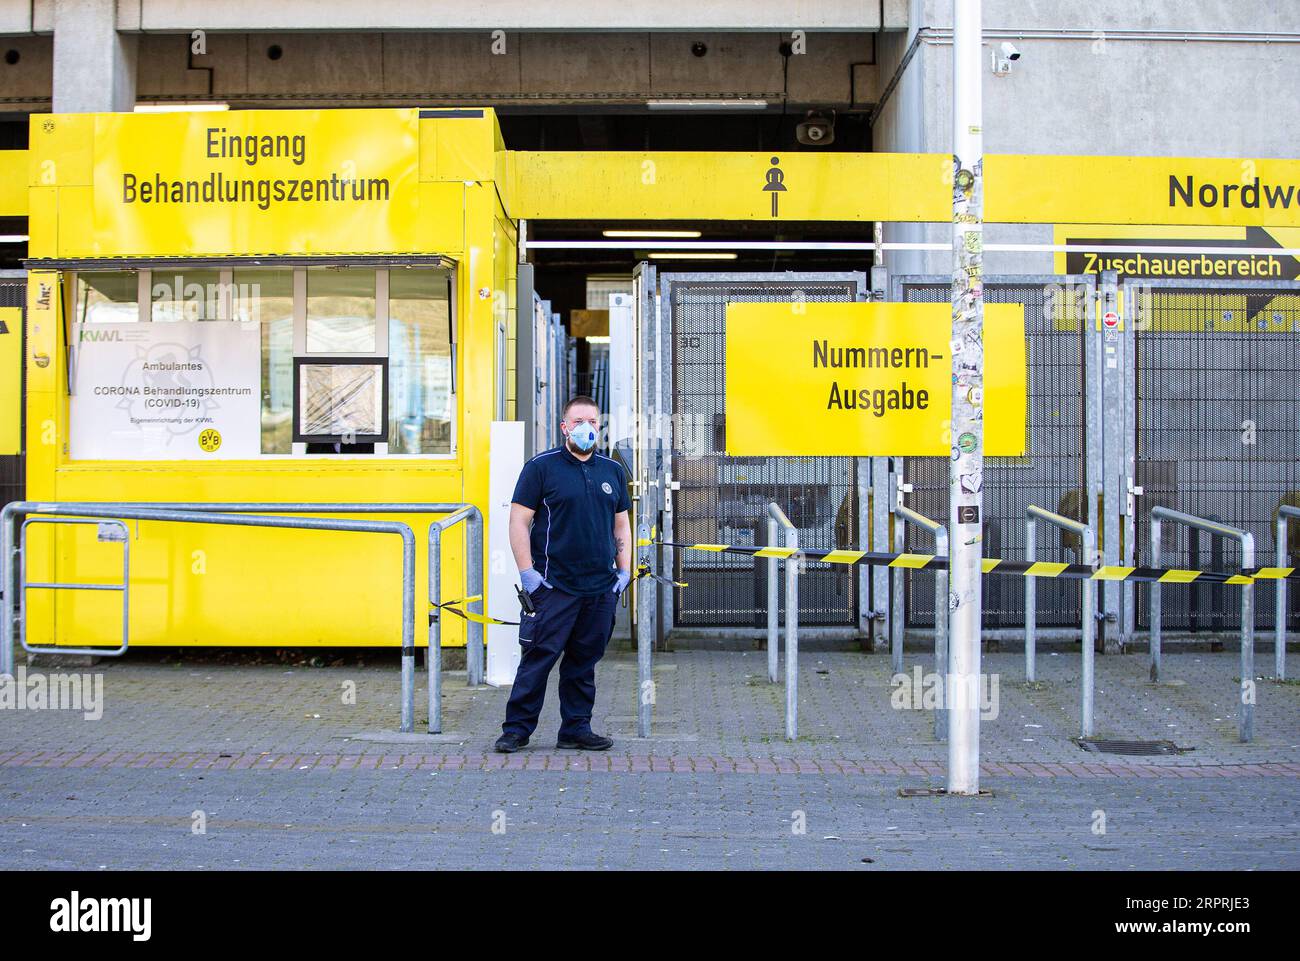 200405 -- DORTMUND, April 5, 2020 Xinhua -- A security member wearing a protective mask stands guard outside the COVID-19 testing center at Borussia Dortmund s stadium in Dortmund, Germany, April 4, 2020. Borussia Dortmund s stadium housed a COVID-19 testing center From Saturday. Rooms in the Westfalenstadion s north stand have been prepared to take in people suspected of suffering from COVID-19. It is hoped the center will relieve pressure on the medical facilities in the city of Dortmund. Photo by Joachim Bywaletz/Xinhua SPGERMANY-DORTMUND-STADIUM-COVID-19-TESTING CENTER PUBLICATIONxNOTxINxC Stock Photo